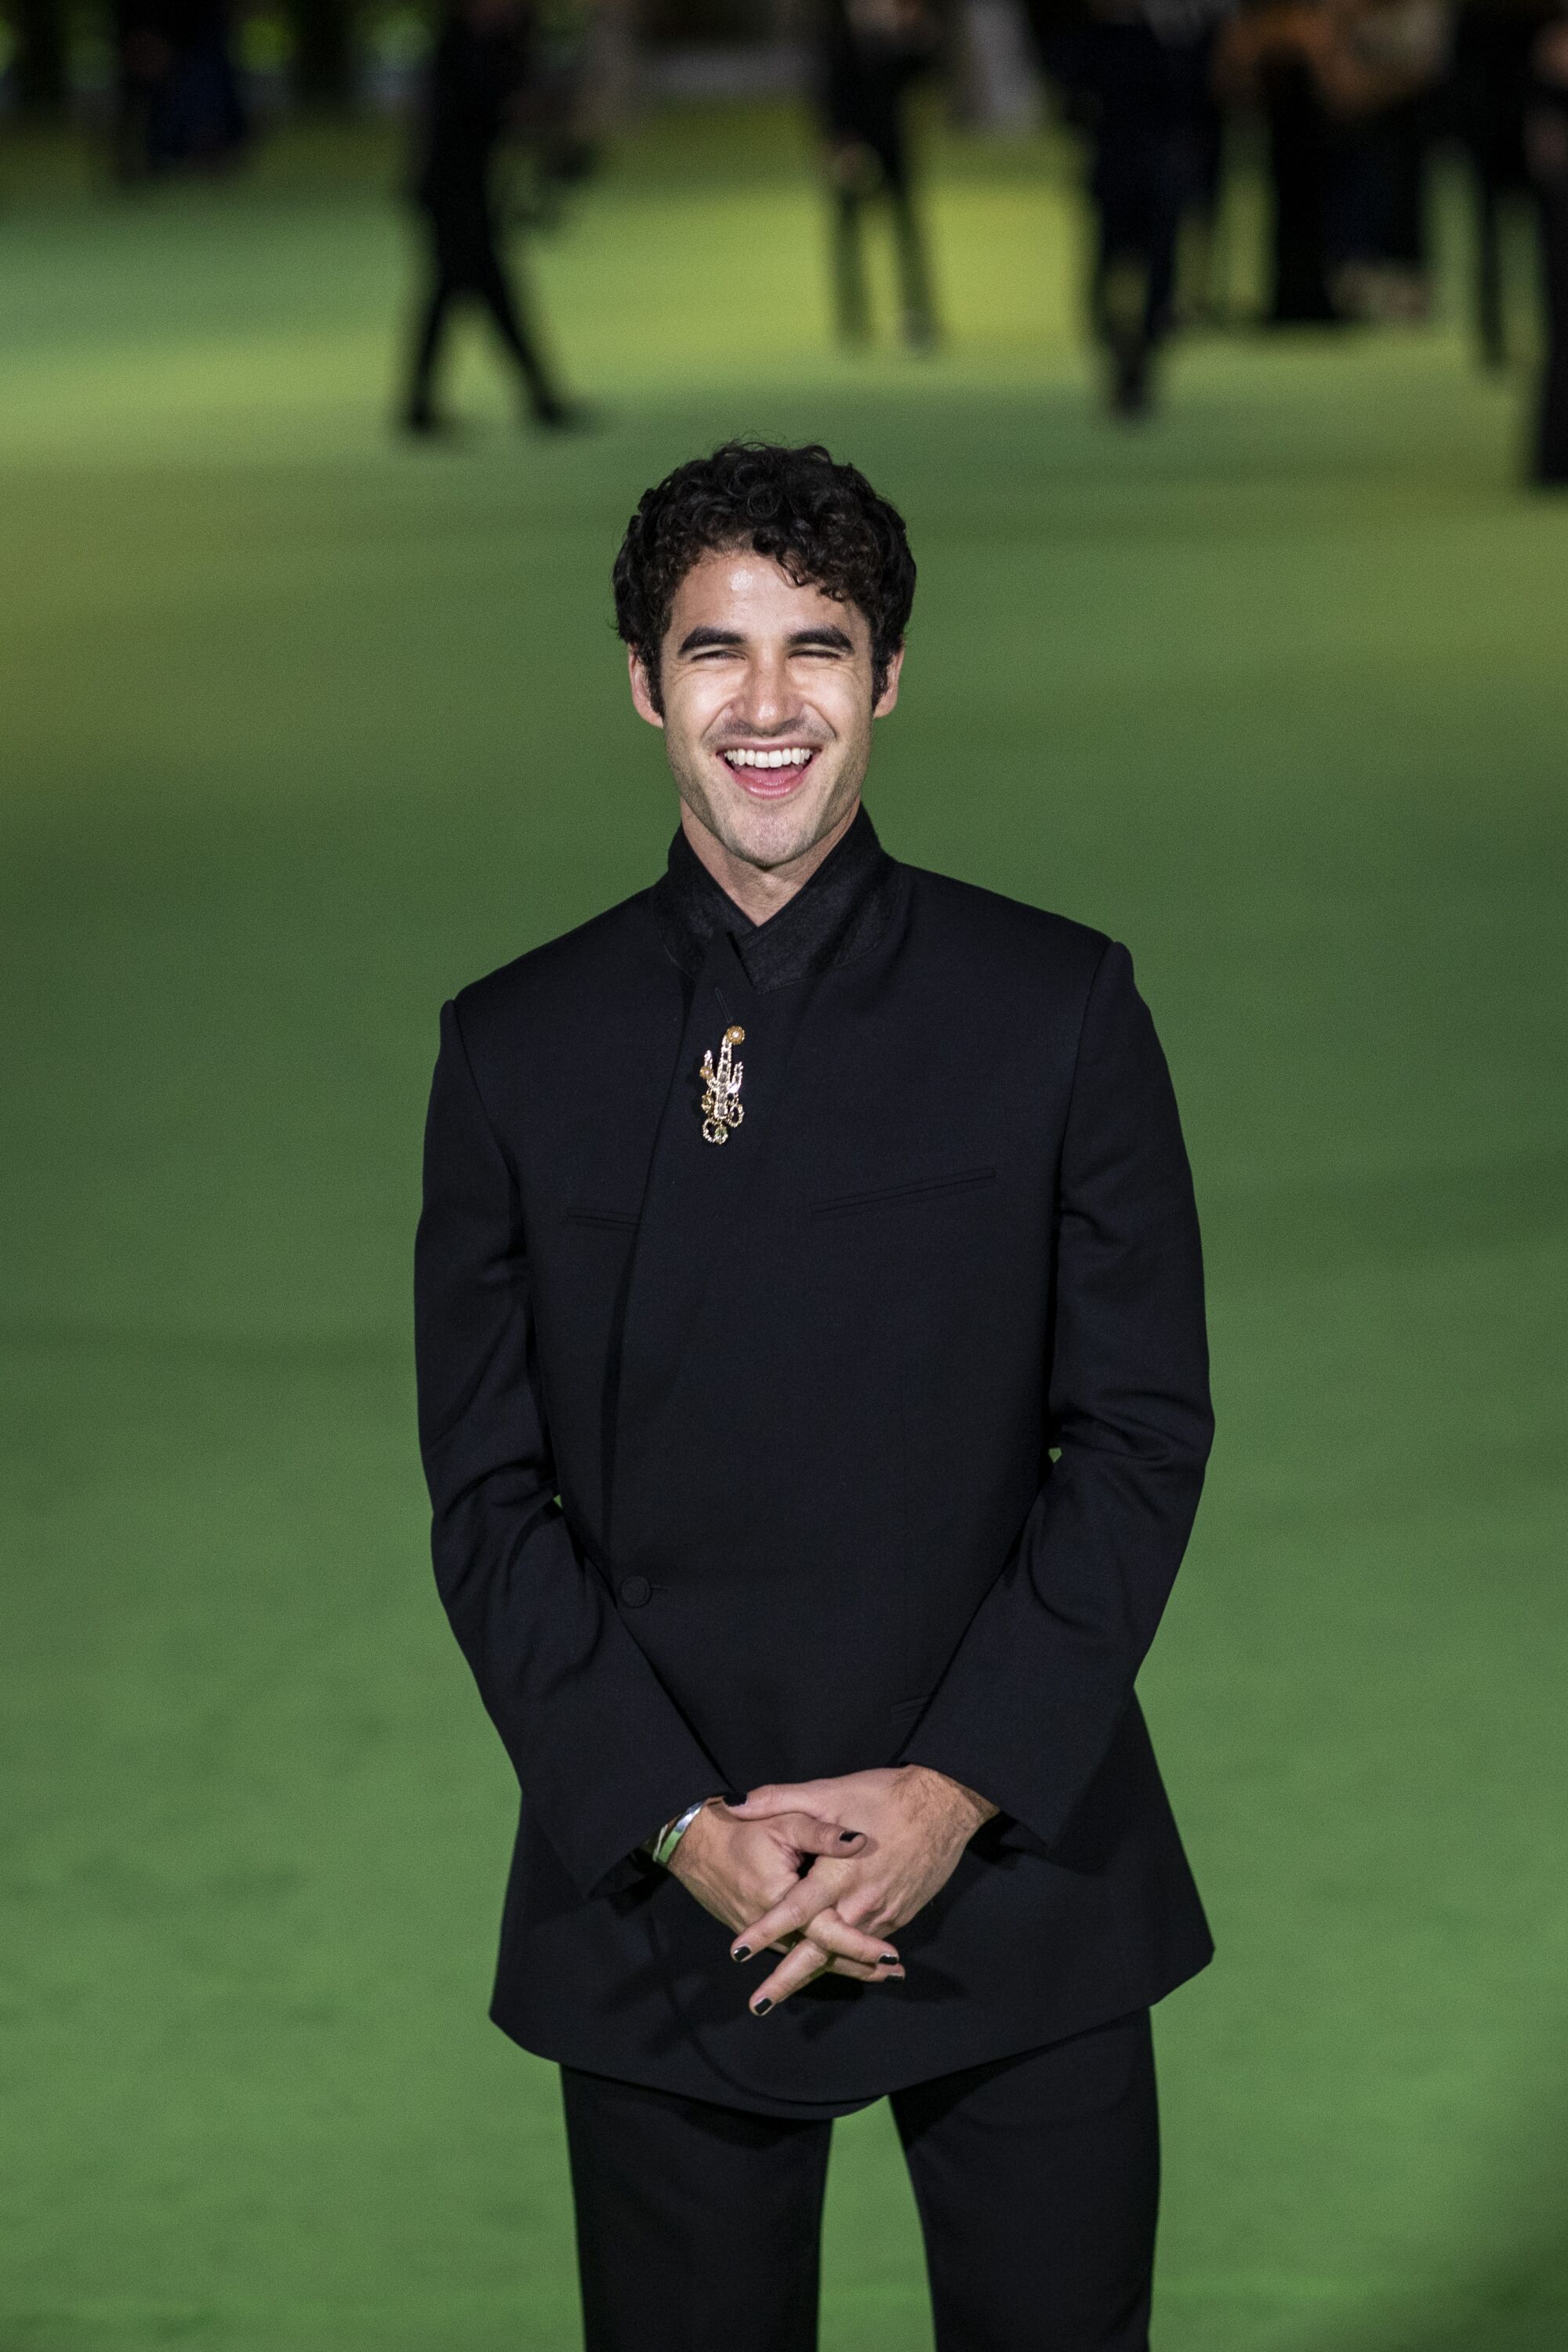 A man smiling in a black suit on a green carpet